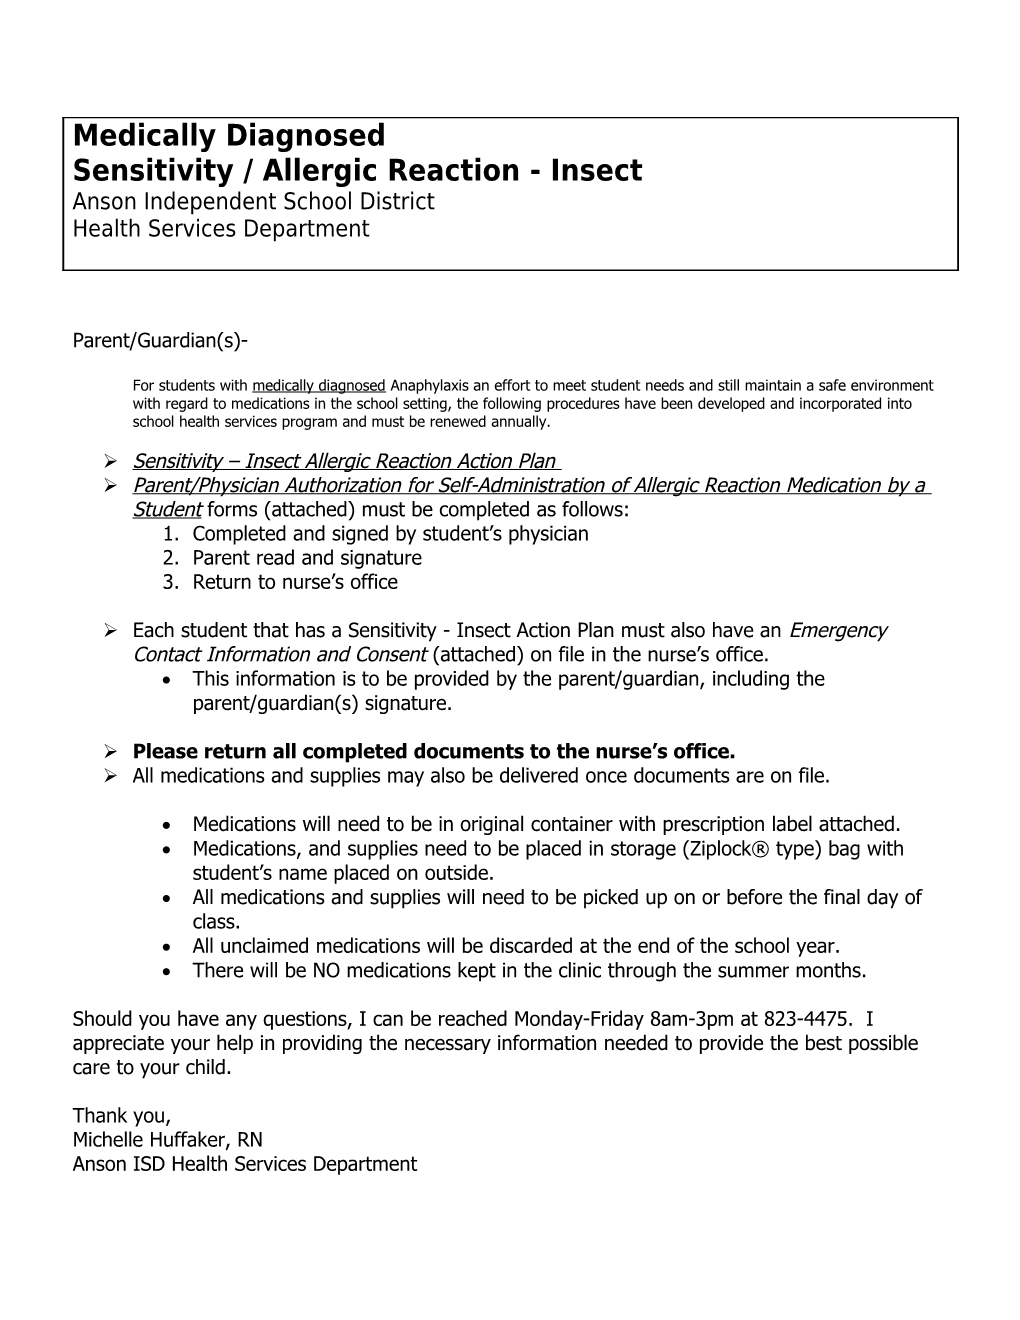 Sensitivity Insect Allergic Reaction Action Plan